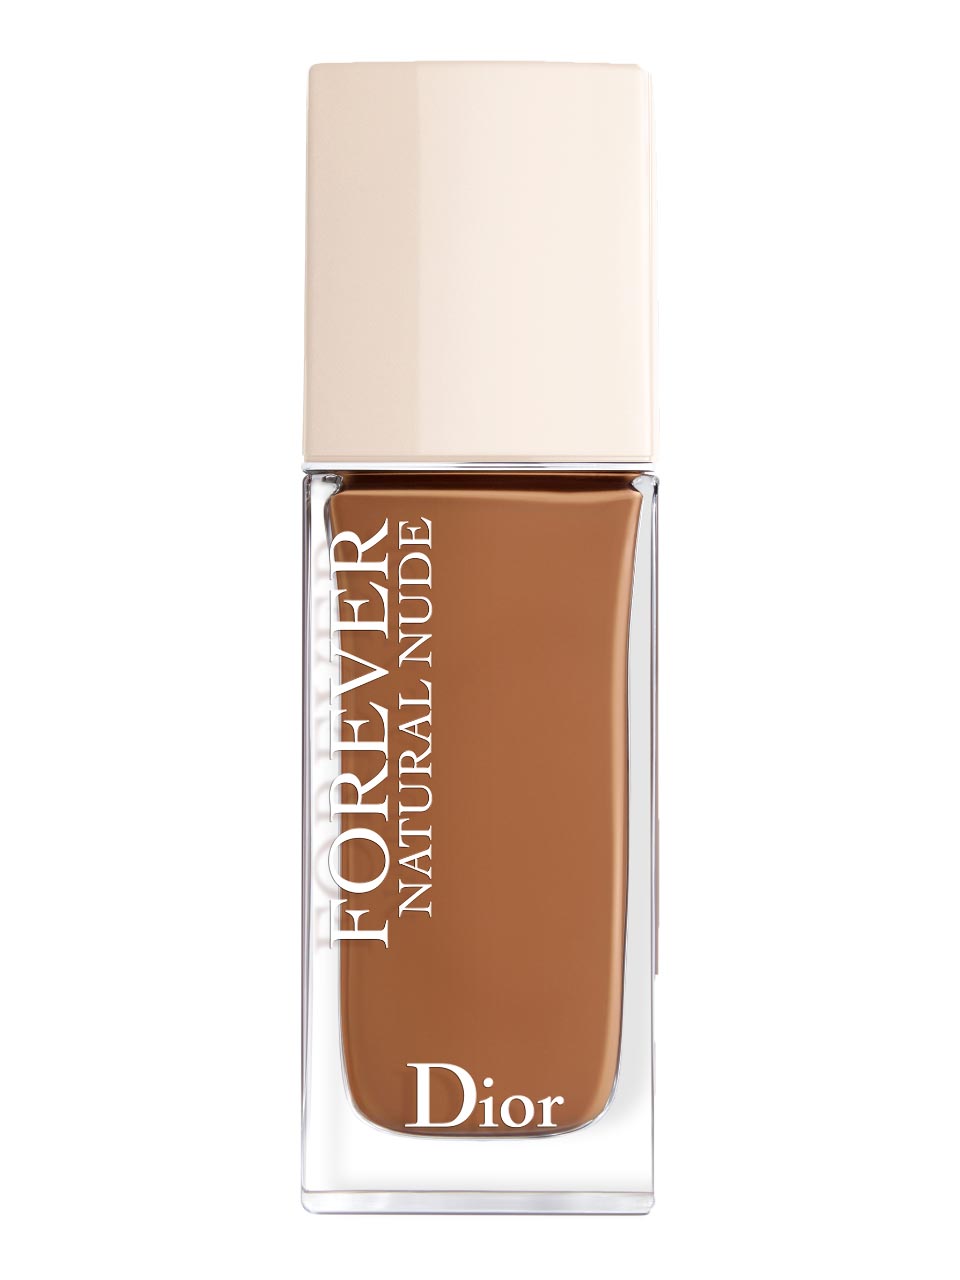 Dior Diorskin Forever Natural Nude Foundation Fluid N° 6N Neutral 30 ml null - onesize - 1